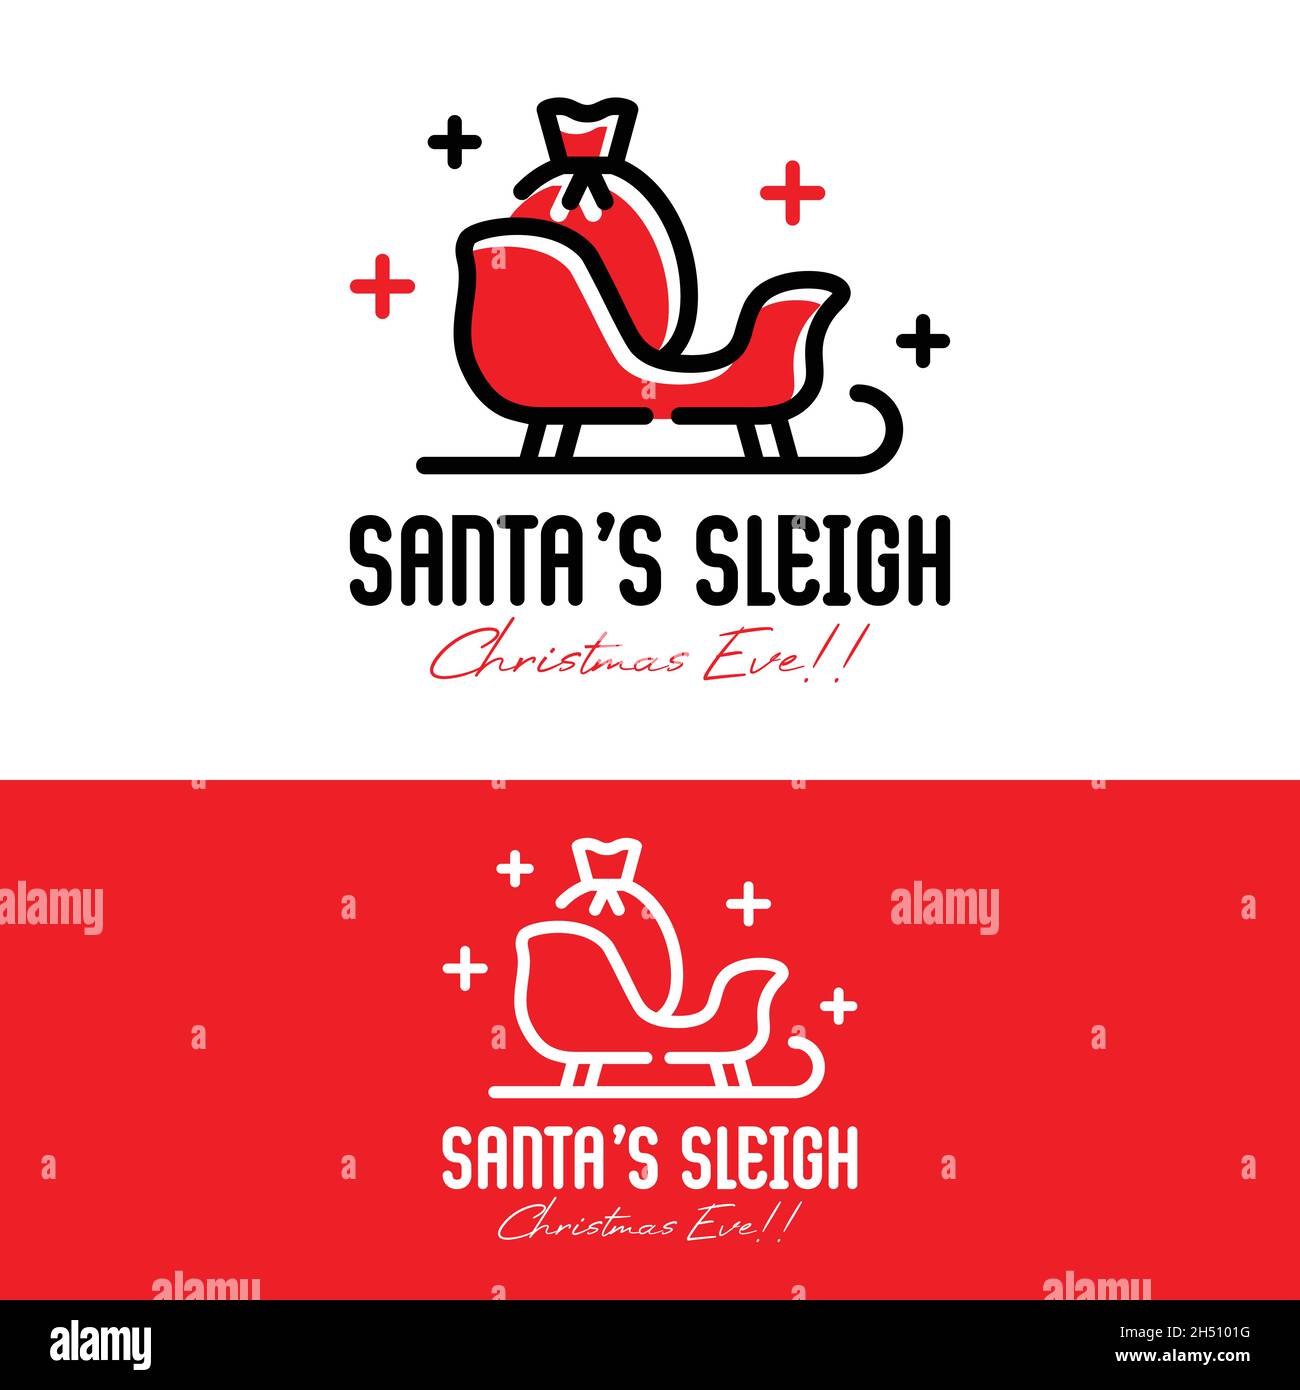 Santa's Sleigh and a Sack Logo Design Template. Sleigh with Line Style Icon and Red Color. Perfect for Christmas and New Year's Business logo Design. Stock Vector